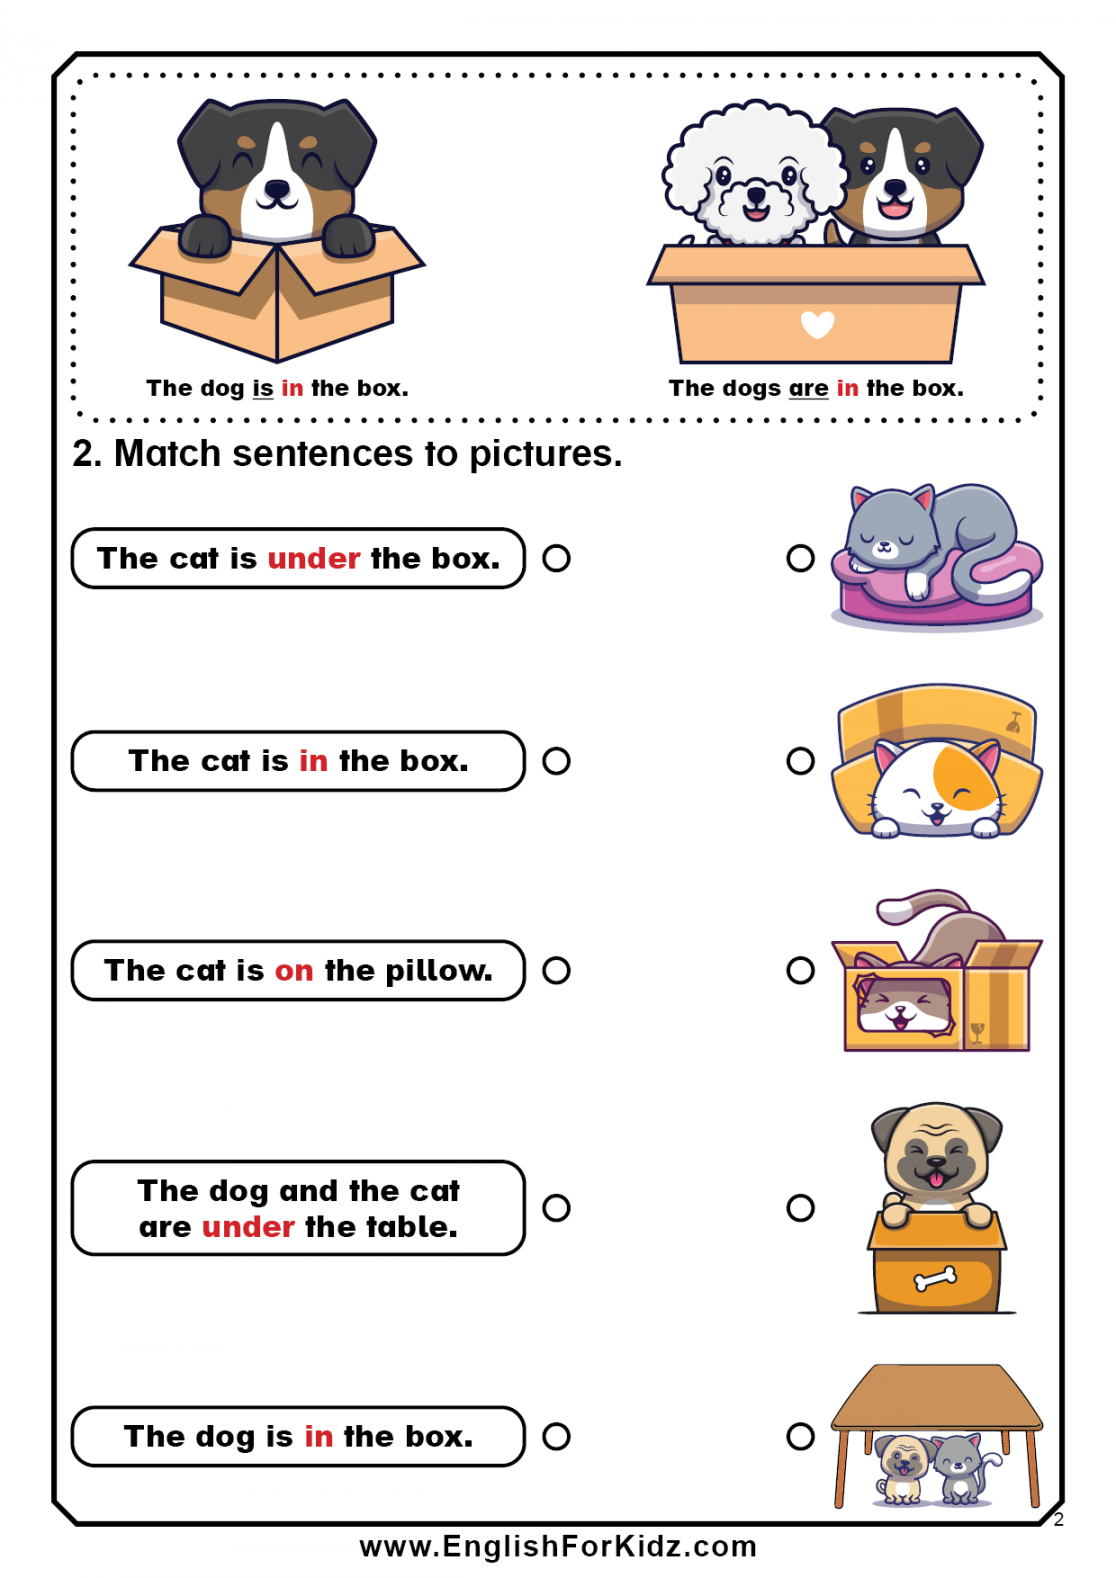 English for Kids Step by Step: Prepositions Worksheets